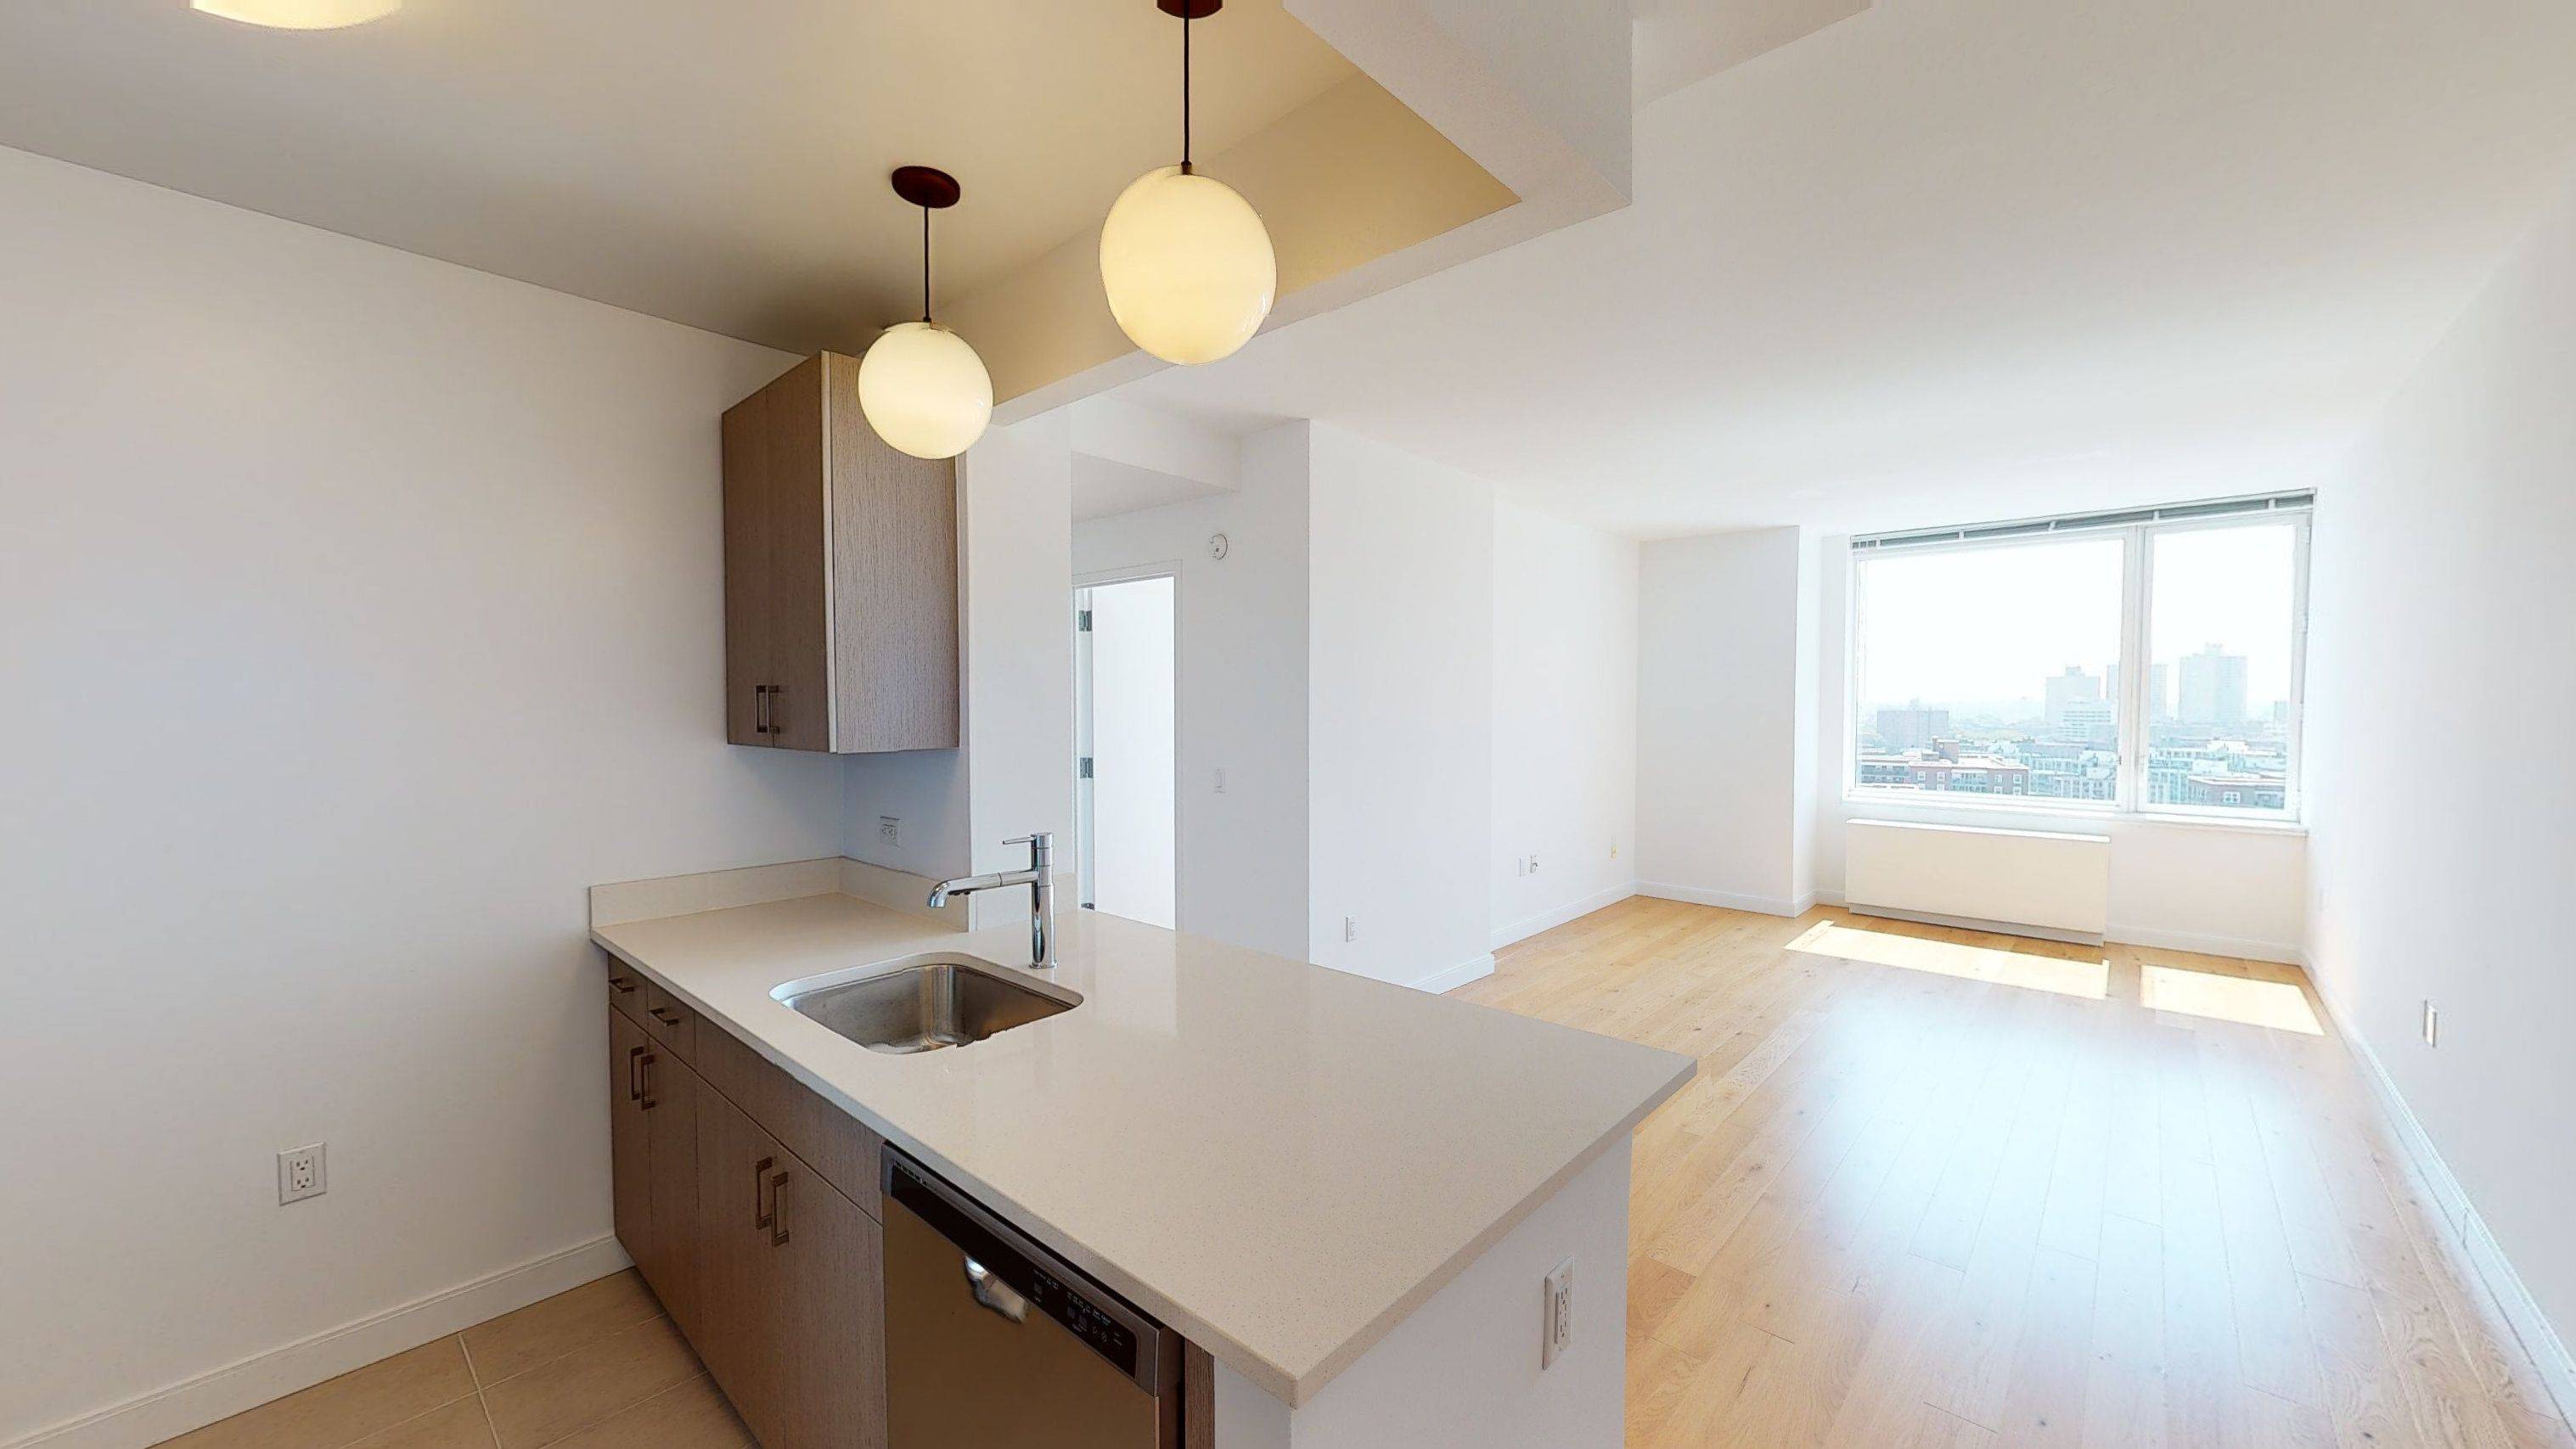 Spacious 1 bedroom plus home office with open gourmet kitchen featuring stainless steel appliances, Caesarstone quartz counters, and eating bar.